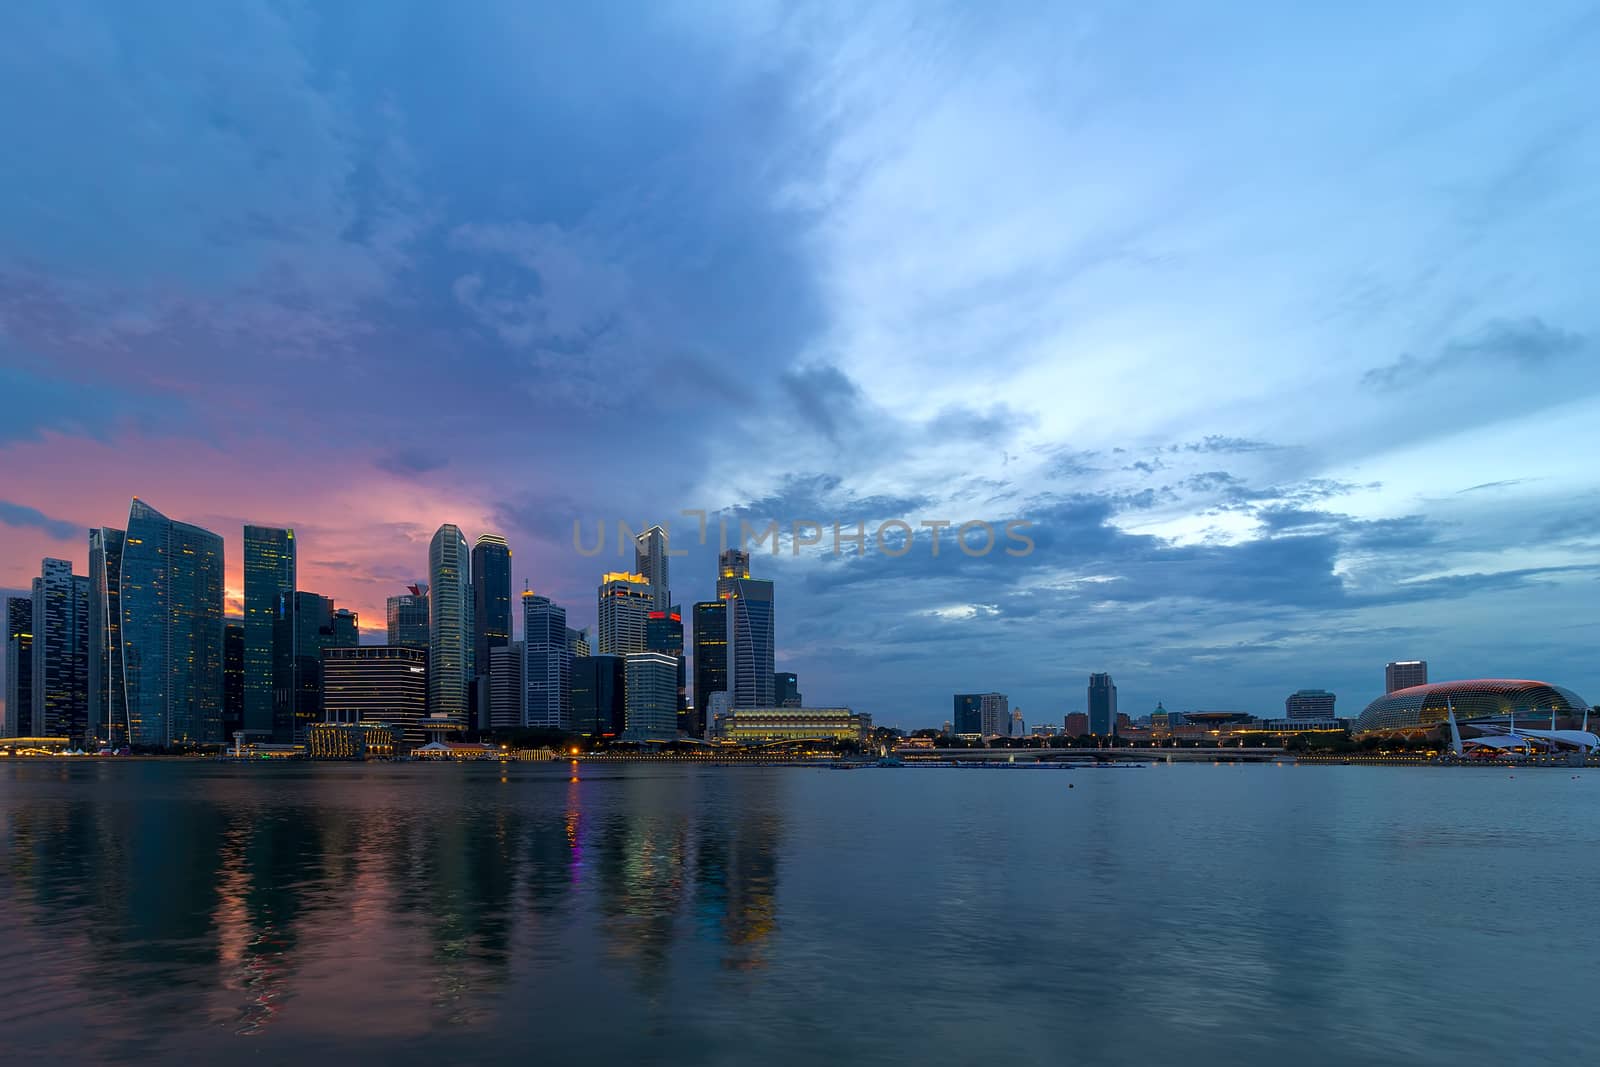 Sunset over Singapore Central Business District City Skyline by Marina Bay